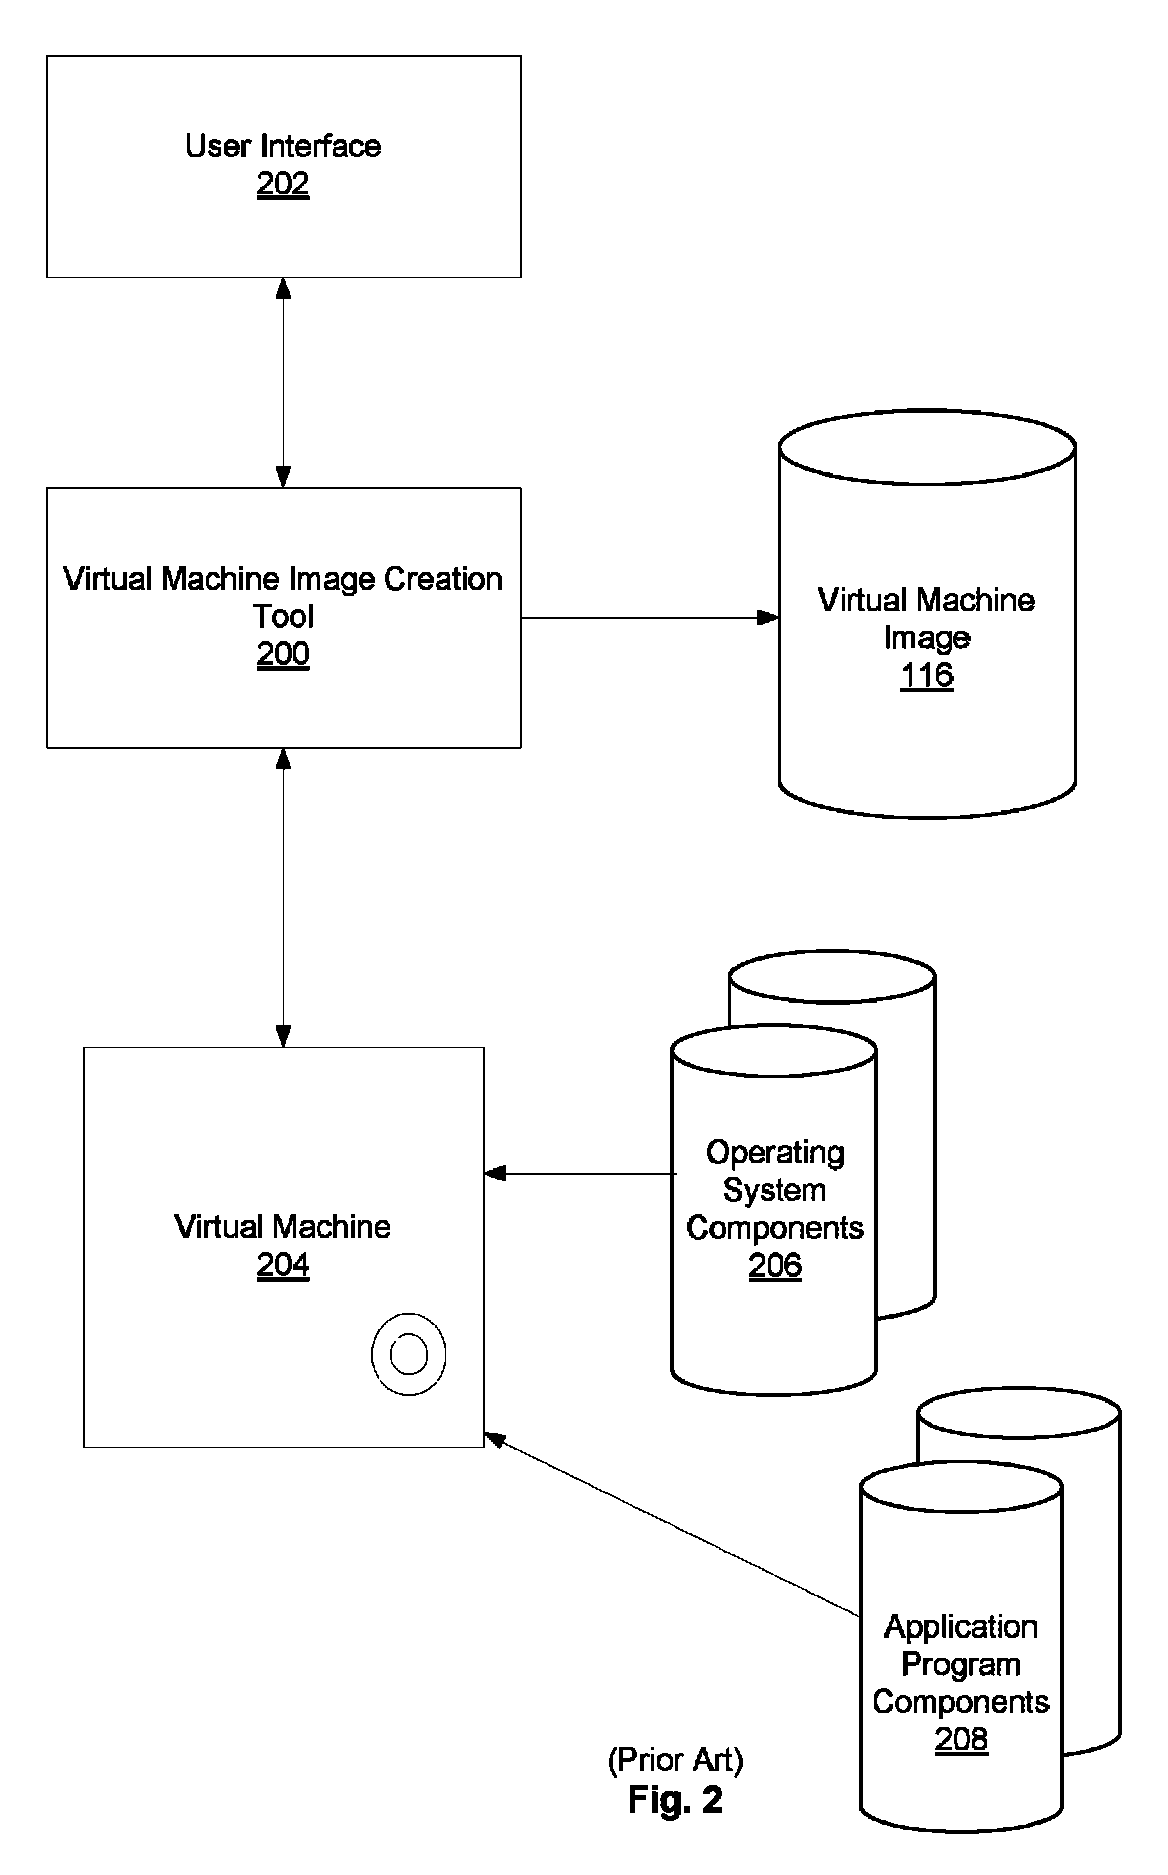 Maintaining synchronization of virtual machine image differences across server and host computers